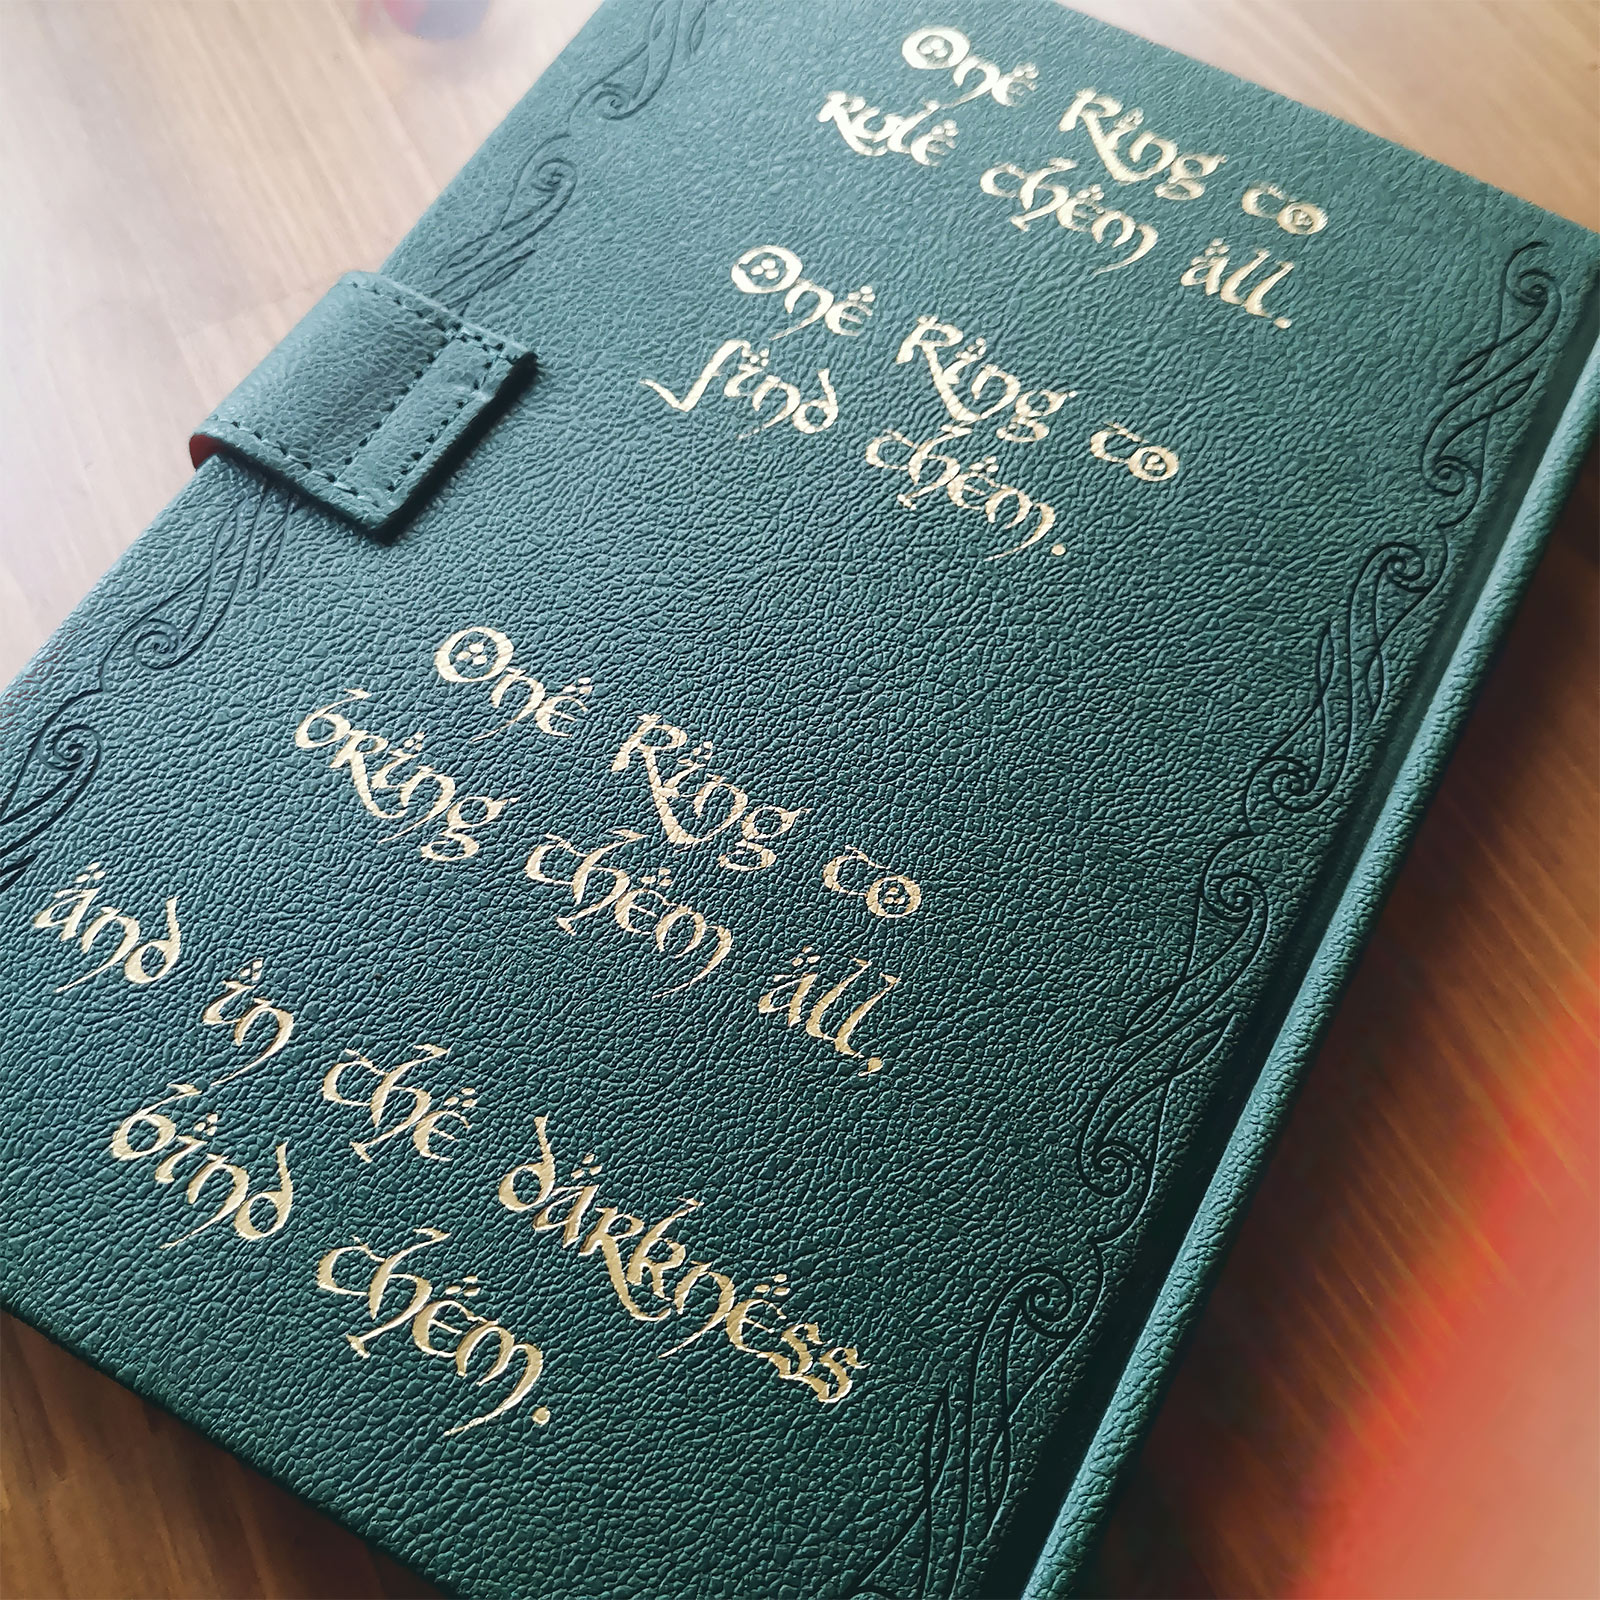 Lord of the Rings - The One Ring Premium A5 Notebook